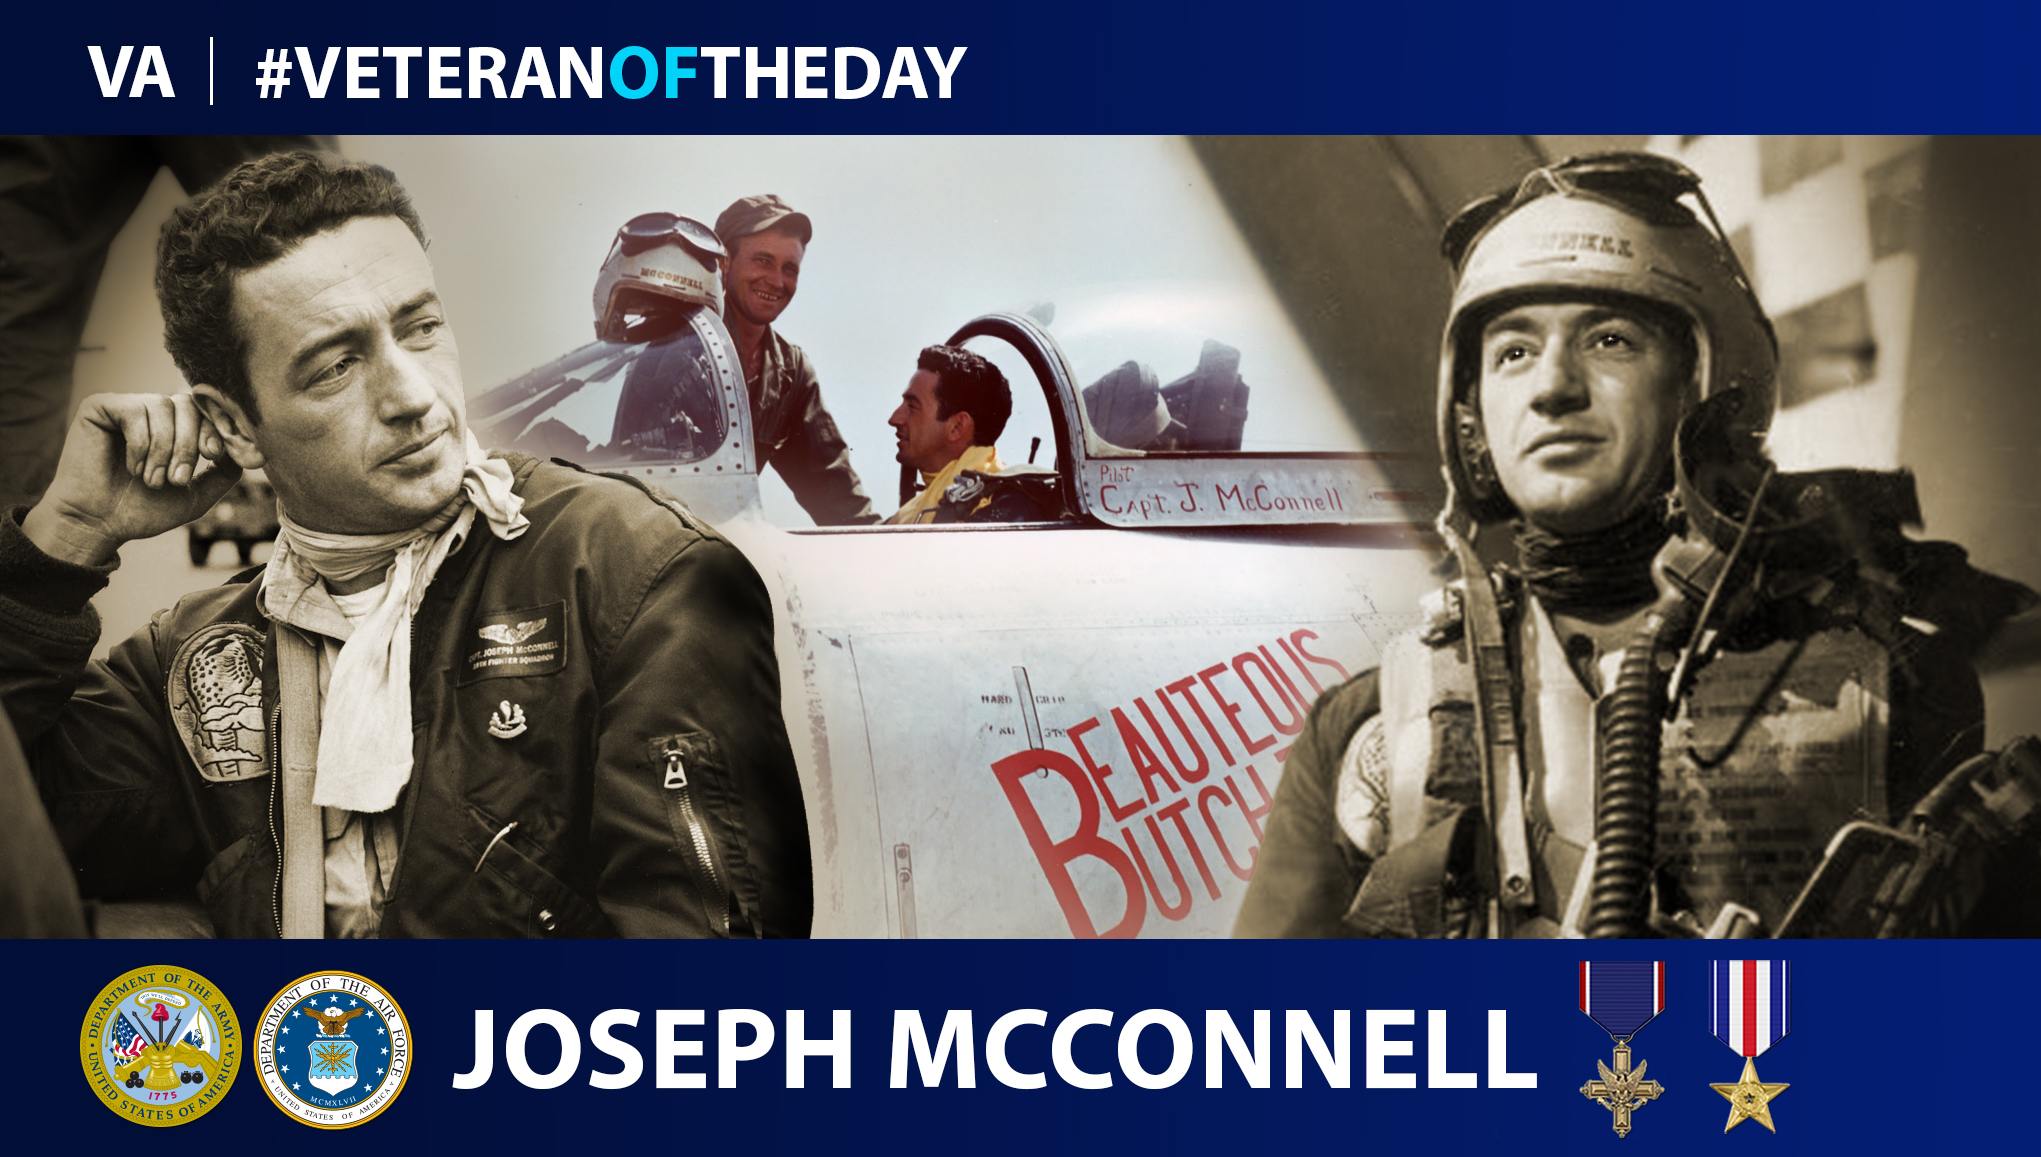 Army and Air Force Veteran Joseph McConnell is today’s Veteran of the Day.